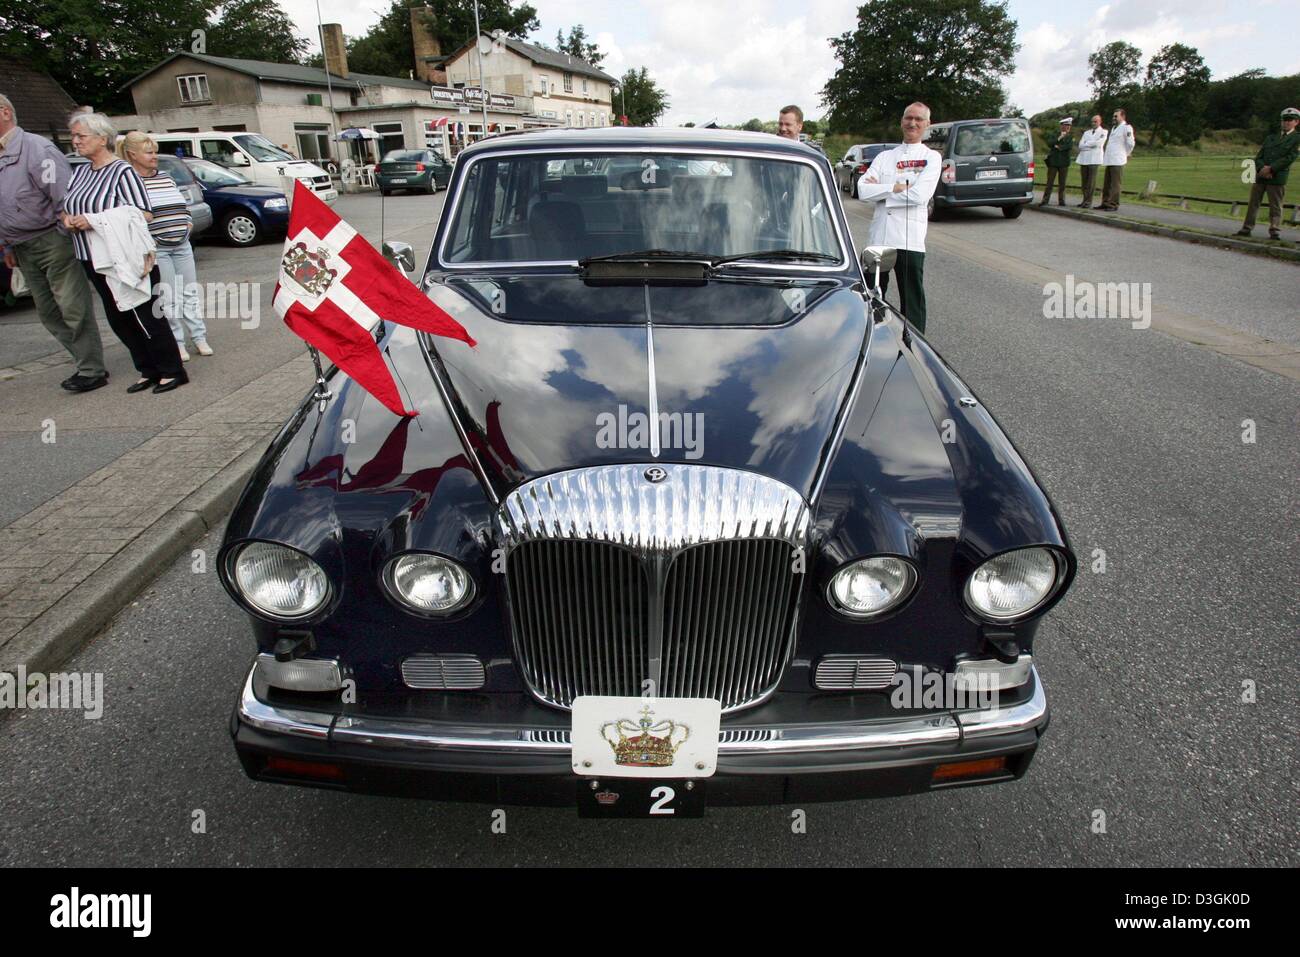 (dpa) - The official car of Queen Margrethe II of Denmark, an about 40 year old Daimler, pictured in Schleswig, northern Germany, 27 July 2004. The Danish royal couple are in Germany for the 1,200th anniversary of the town of Schleswig. Their trip will also take them to the historic sites of the former dukedom which was under rule of the Danish crown until 1864. Stock Photo